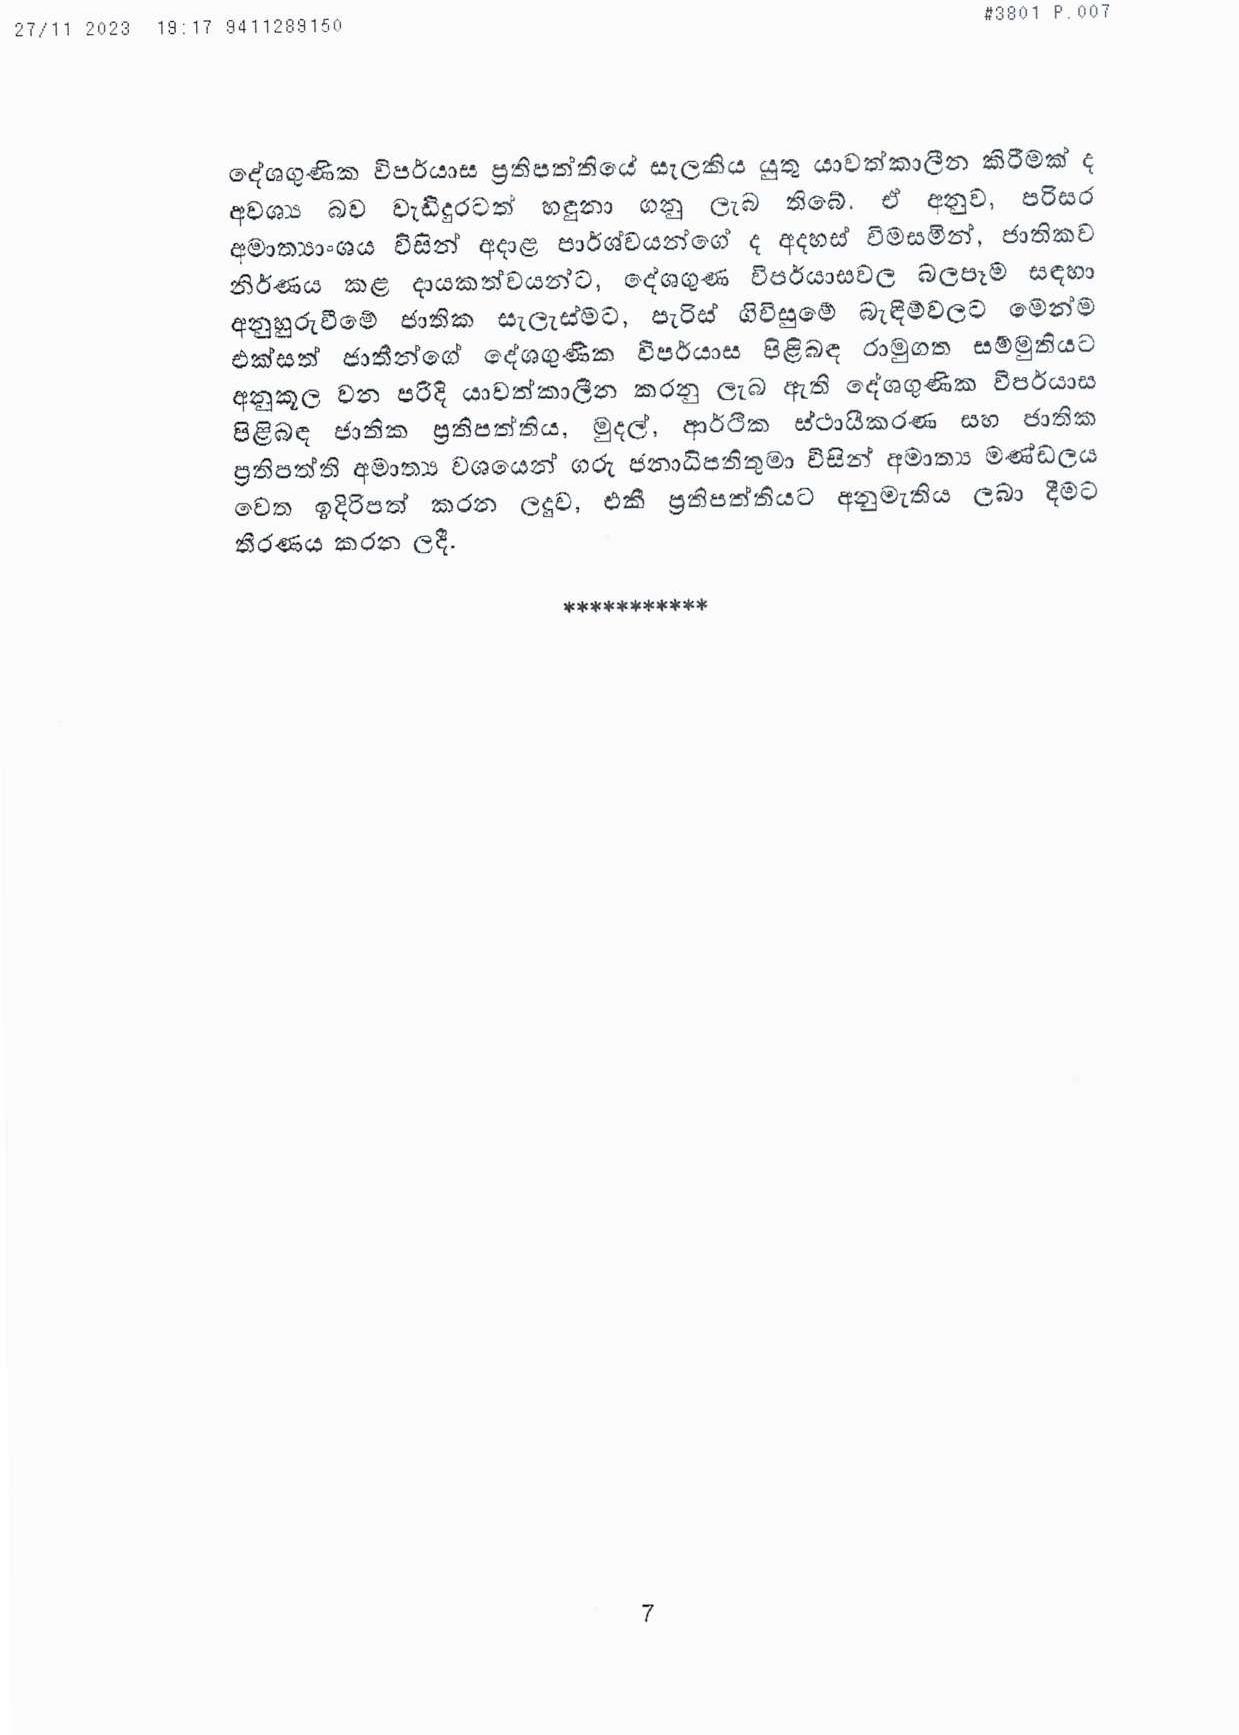 Cabinet Decision on 27.11.2023 page 007